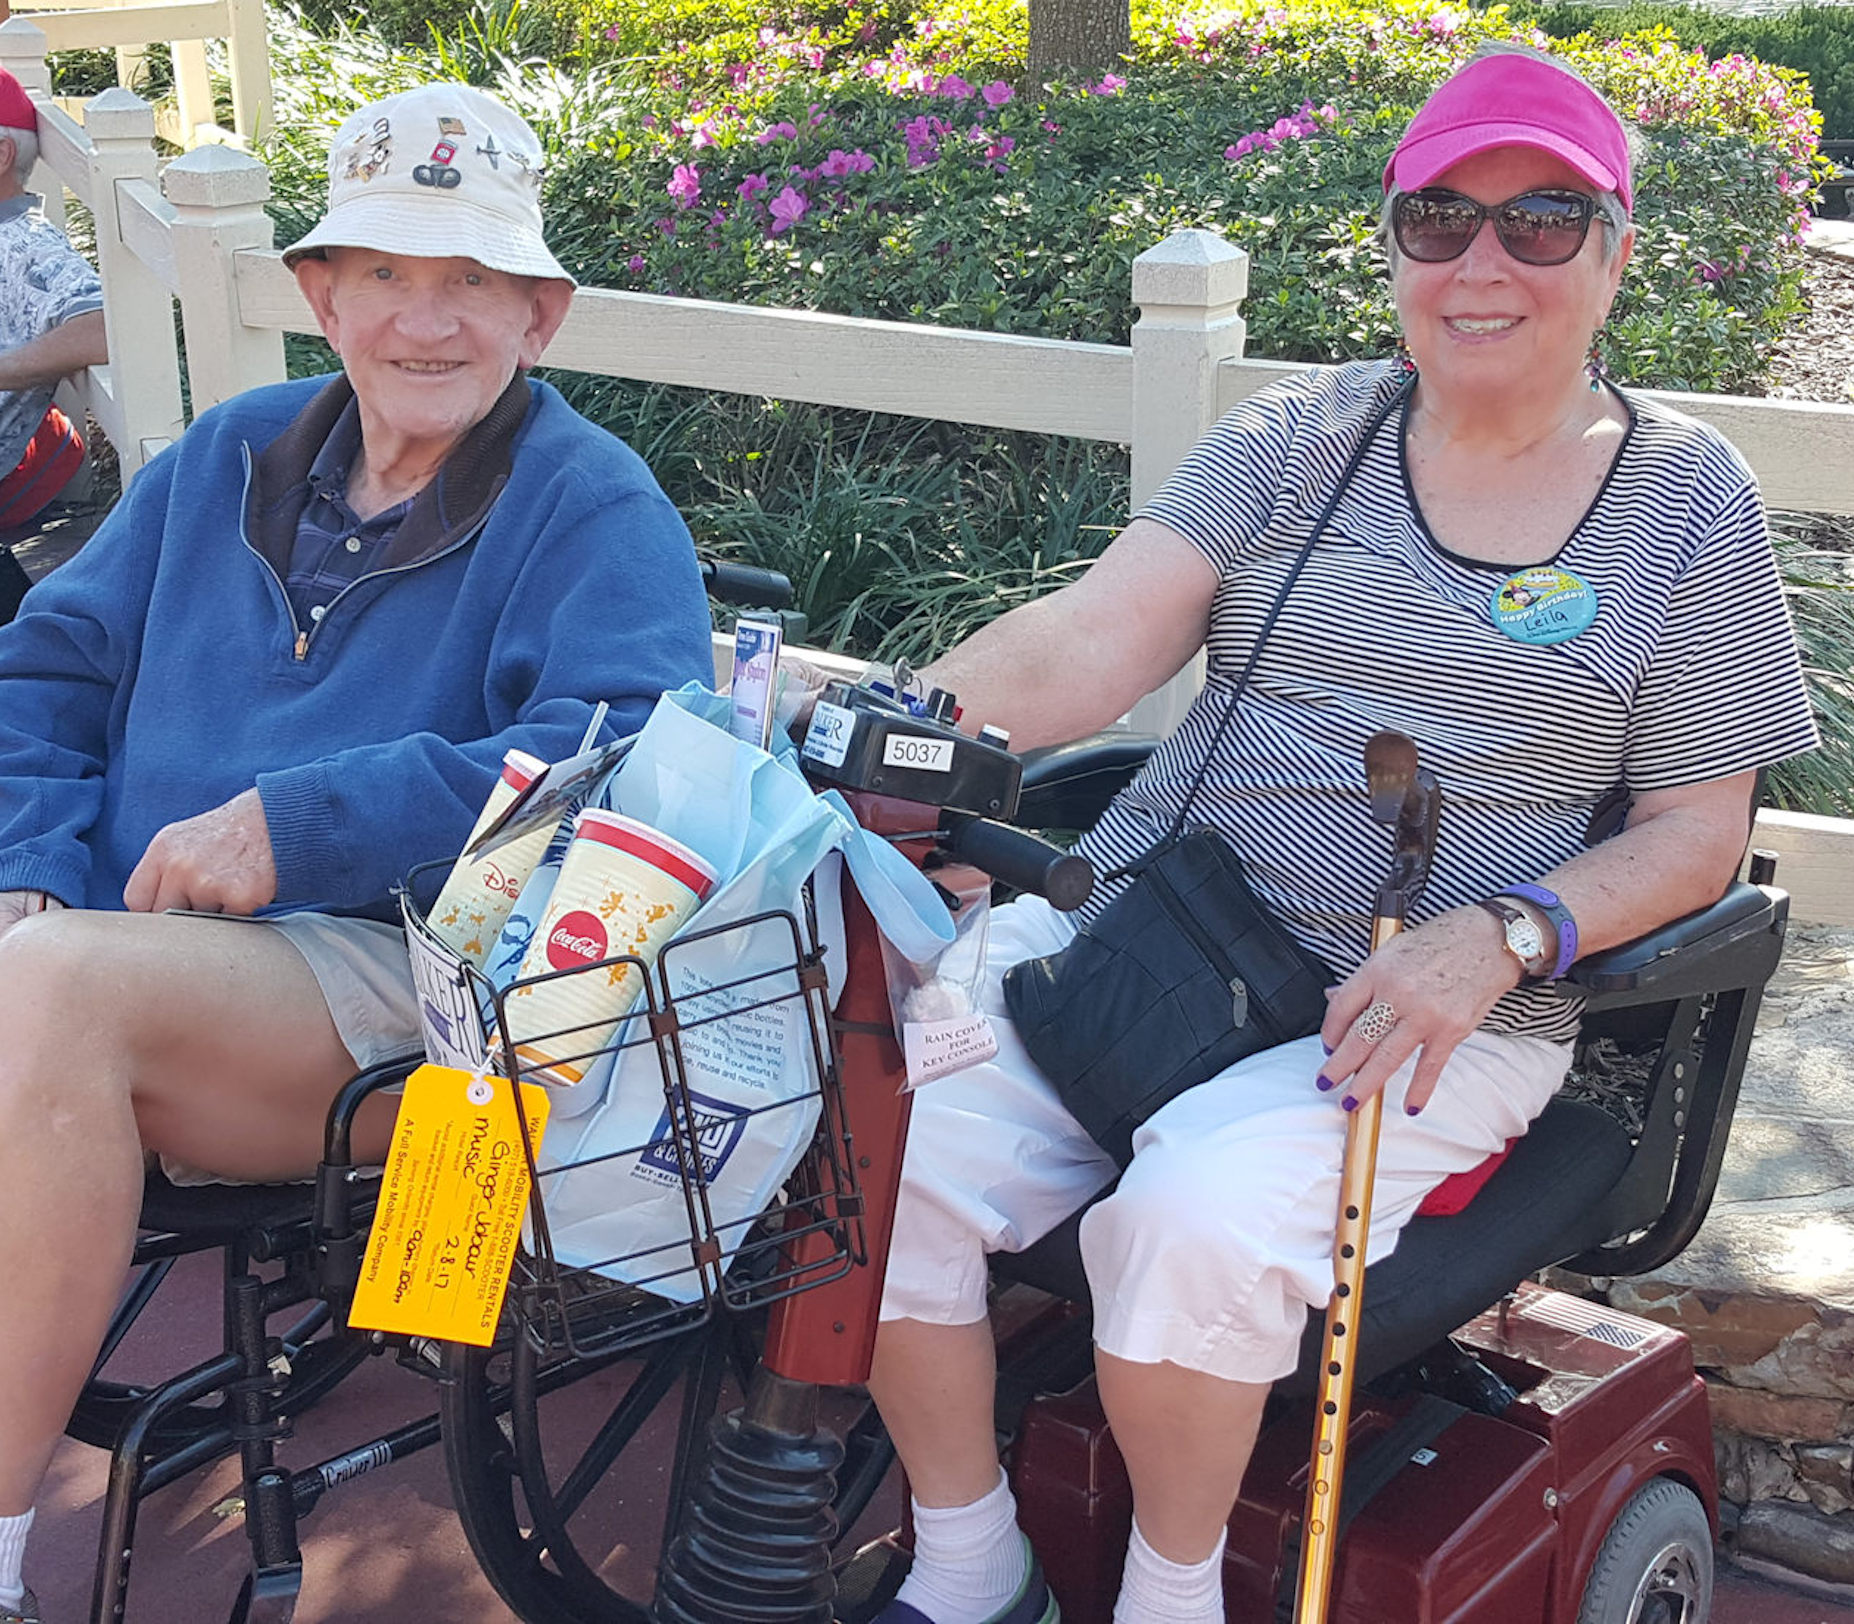 Tips for touring with guests using scooters and wheelchairs |PassPorter.com